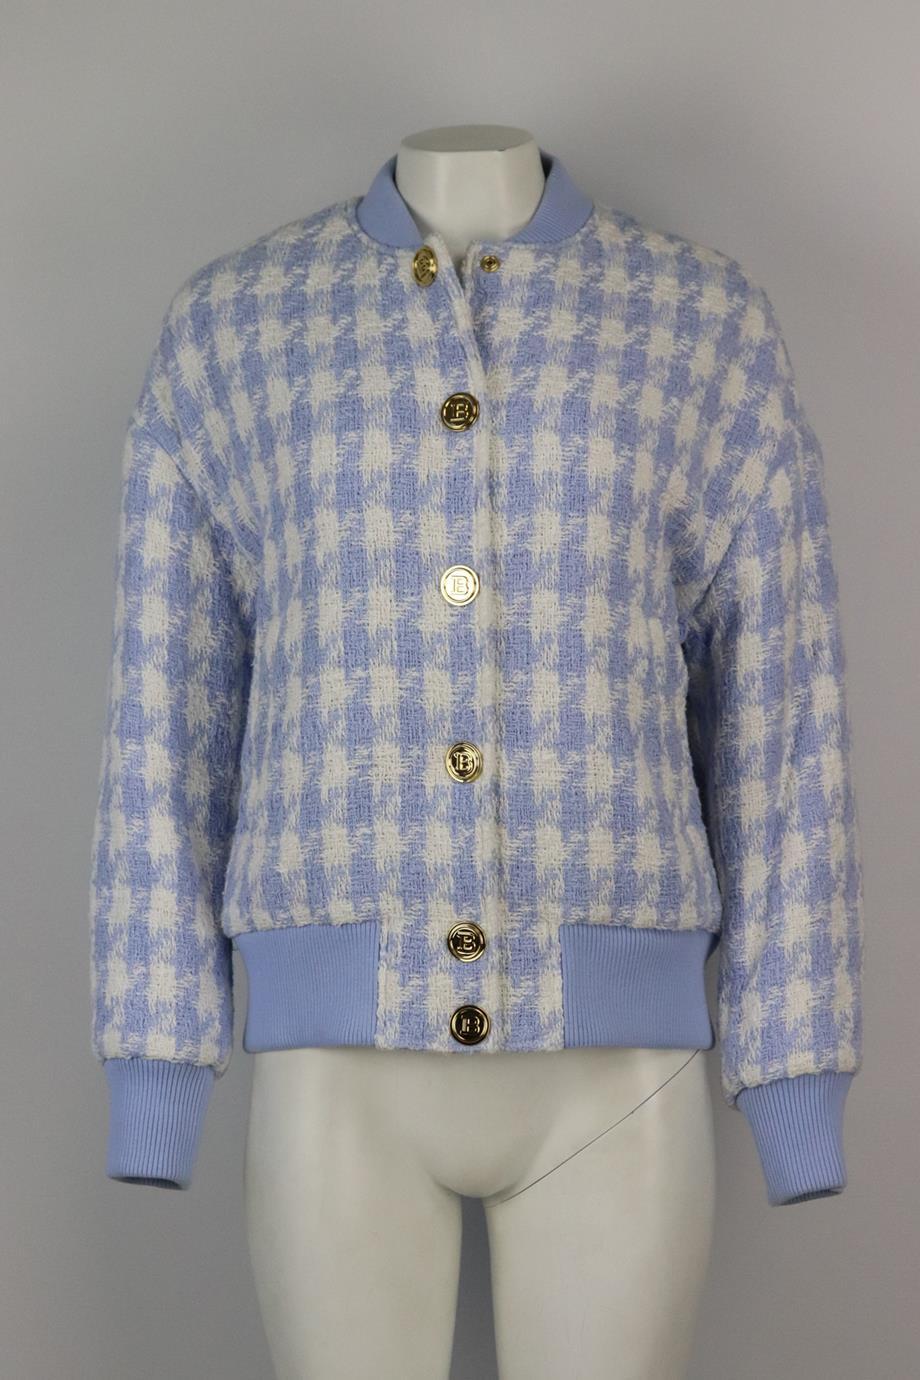 Balmain houndstooth cotton blend tweed bomber jacket. Blue and white. Long sleeve, crewneck. Snap button fastening at front. 92% Cotton, 7% polyester, 1% other fibres; body lining: 52% viscose, 48% cotton; sleeve lining: 52% viscose, 48% cotton;